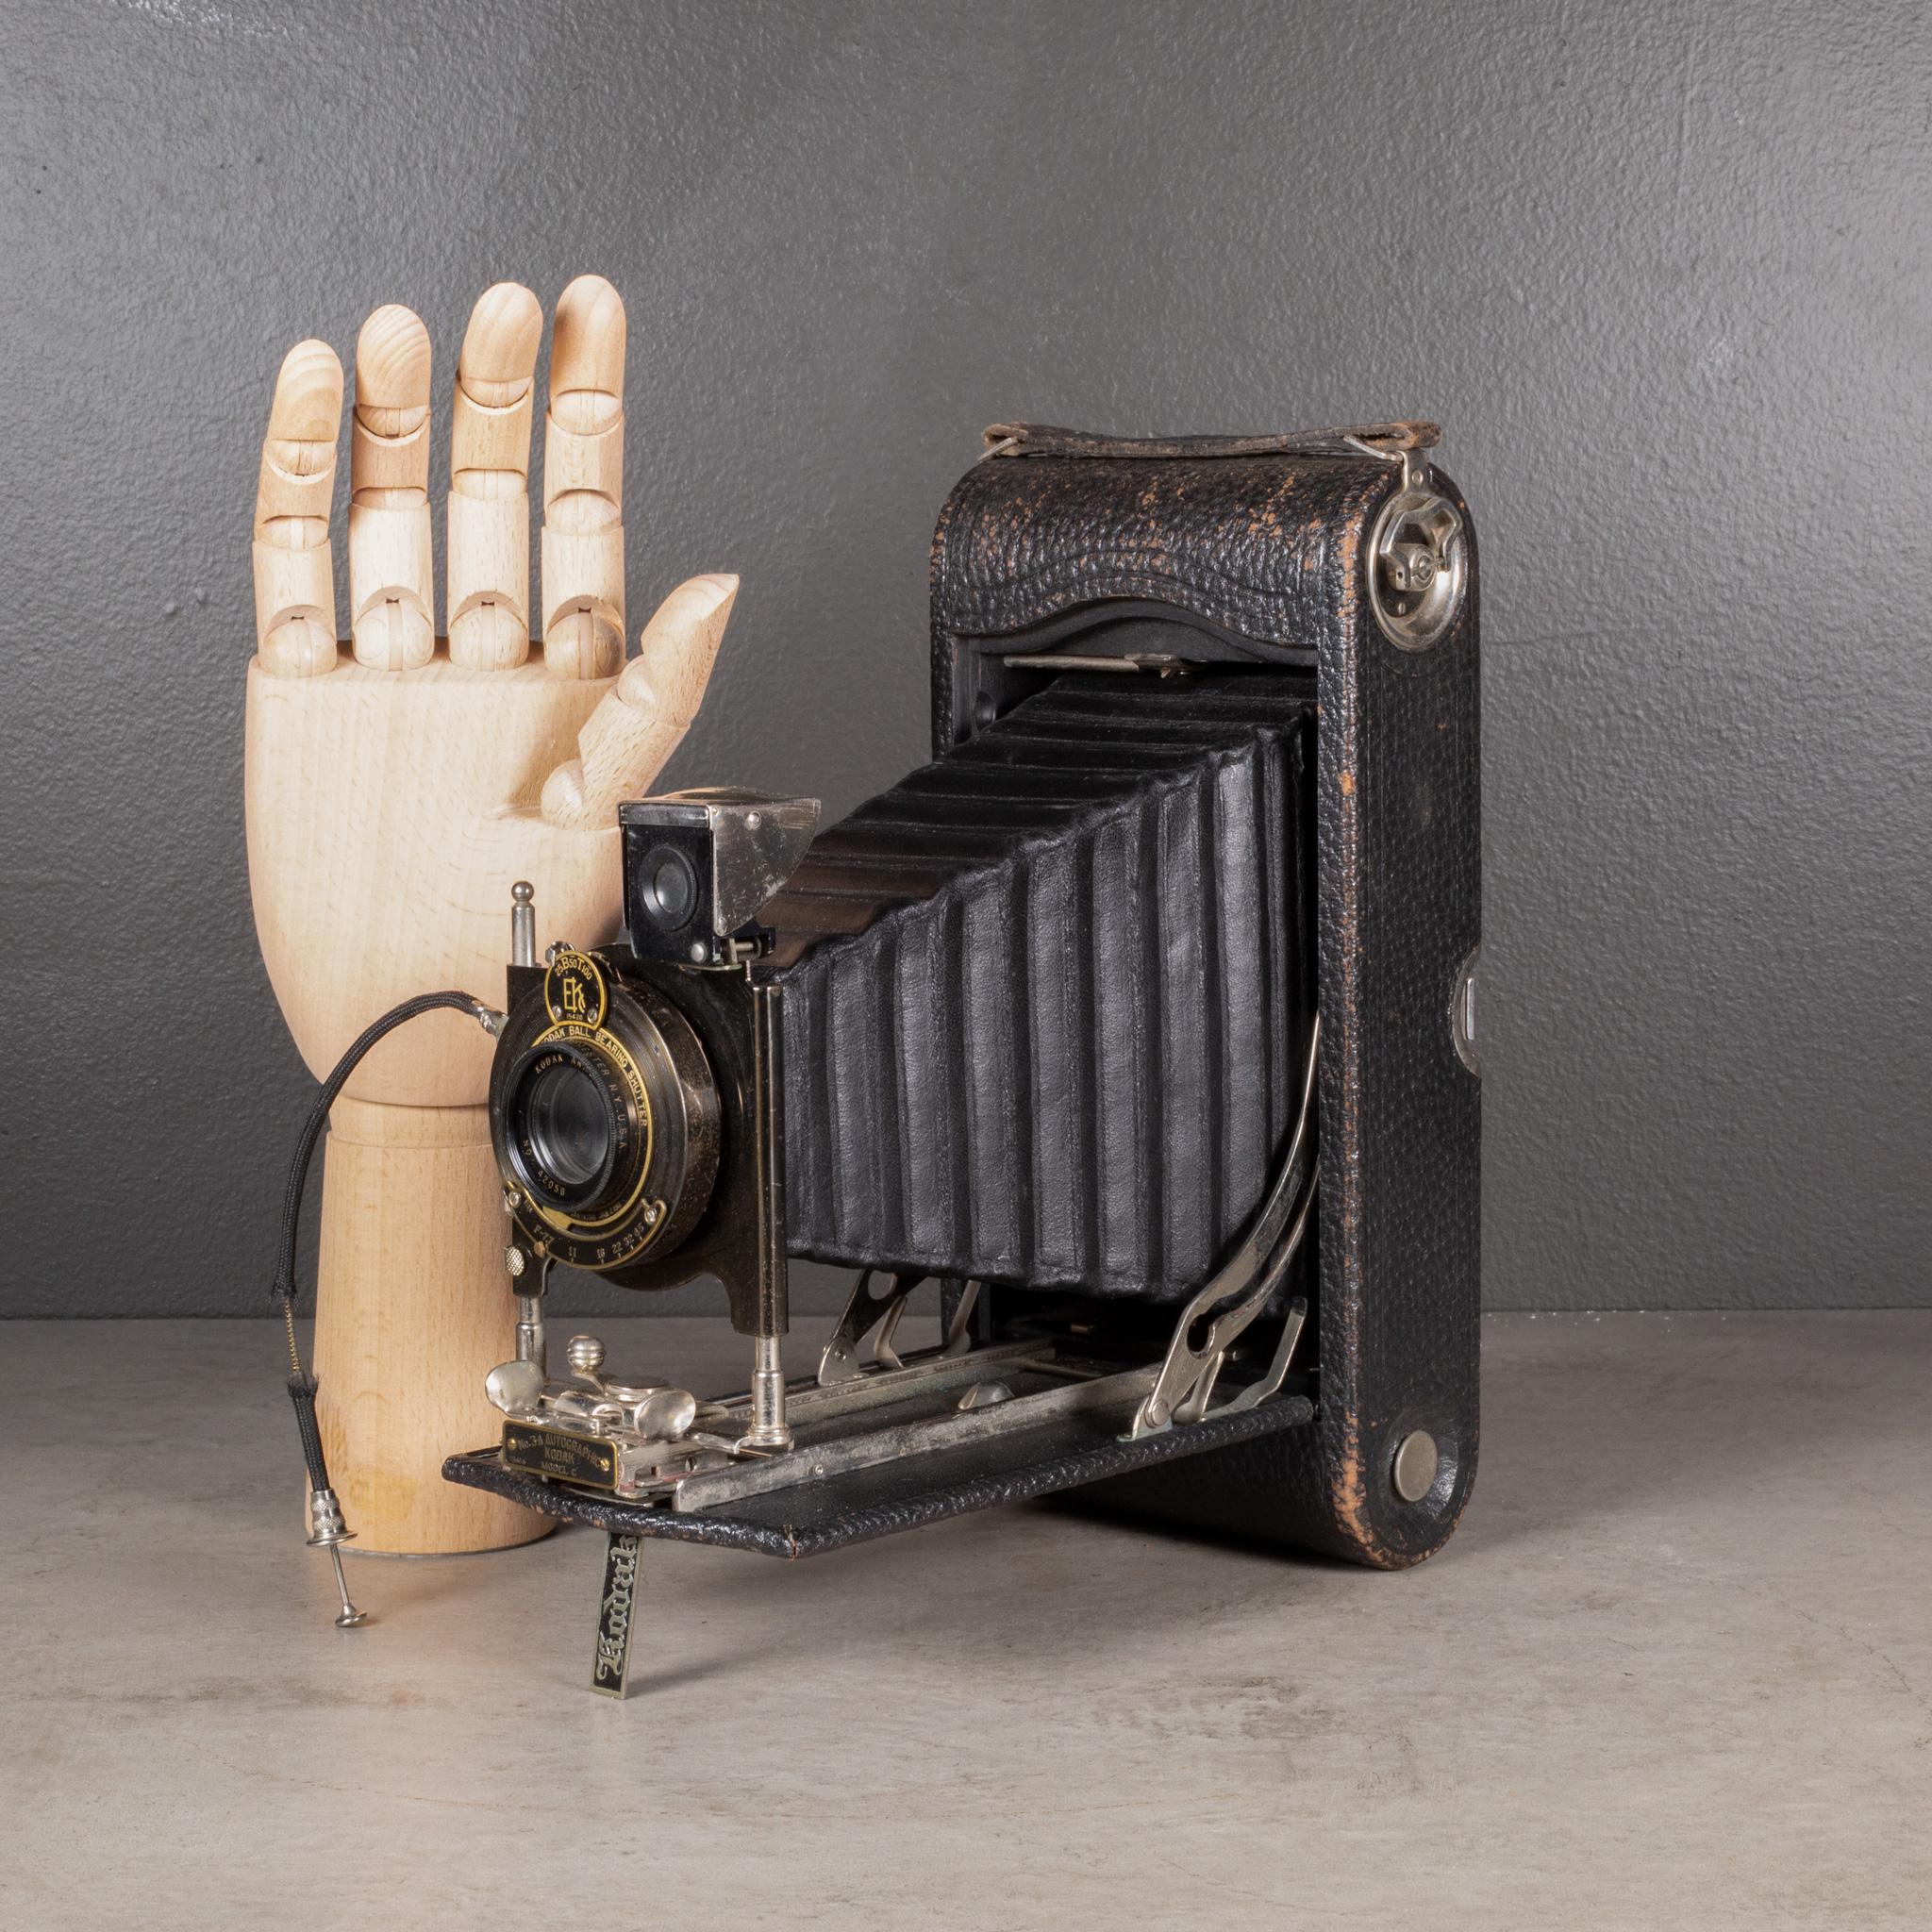 ABOUT

A large Eastman Kodak No. 3A folding camera. The body is wrapped in leather with black metal, chrome and brass accents on the lens. The camera features a hand-held shutter button cord and folds to 2 inches. Original manual included.

This